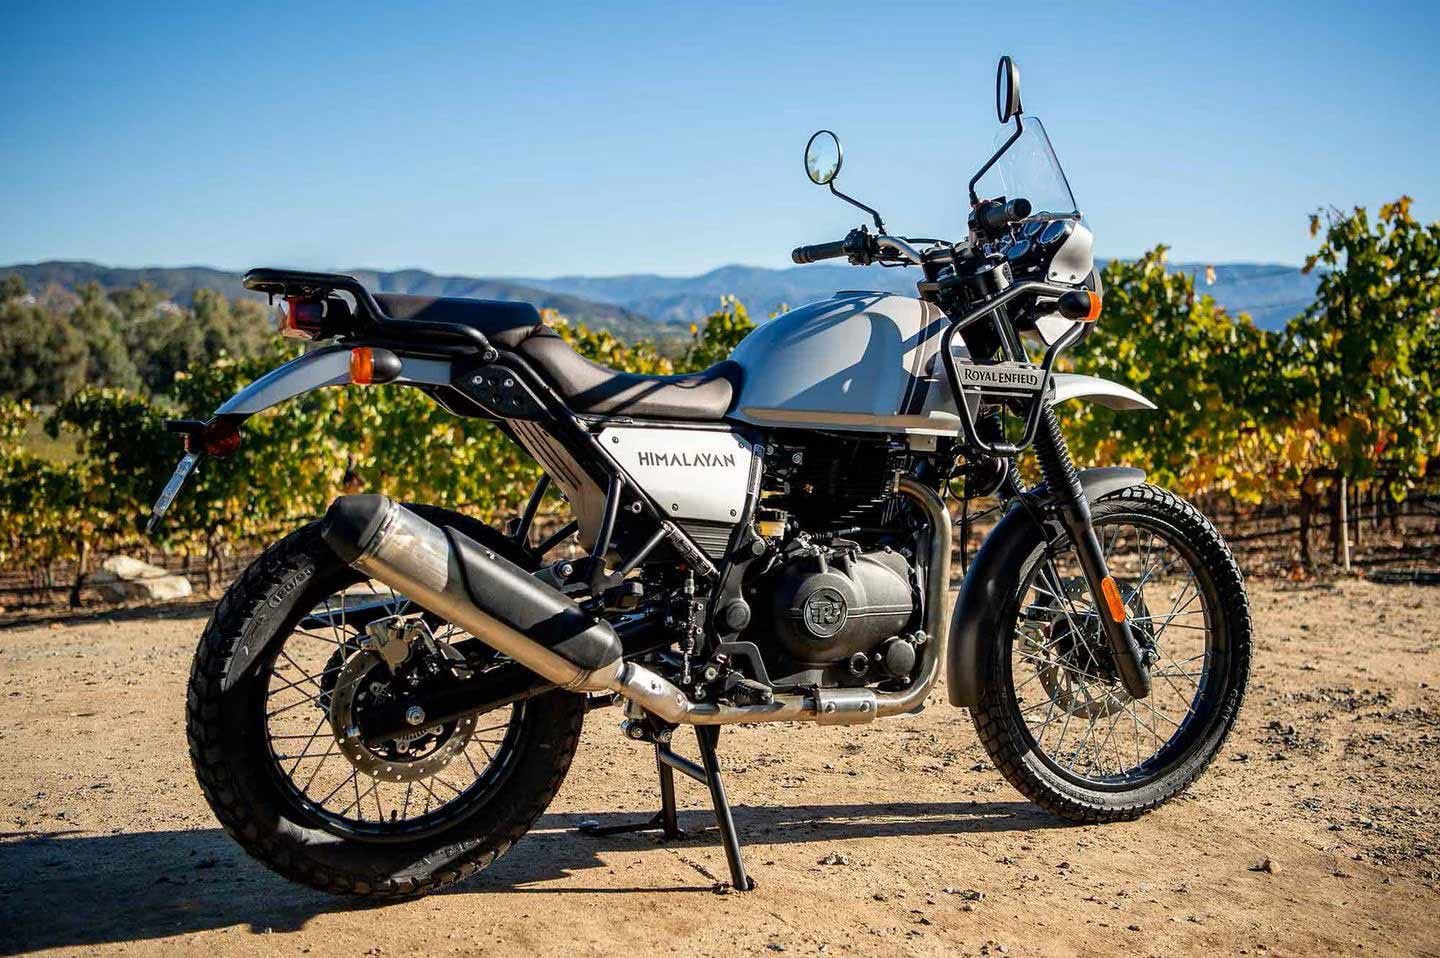 Simple, rugged, and capable, the Royal Enfield Himalayan continues to appeal to a wide range of riders.